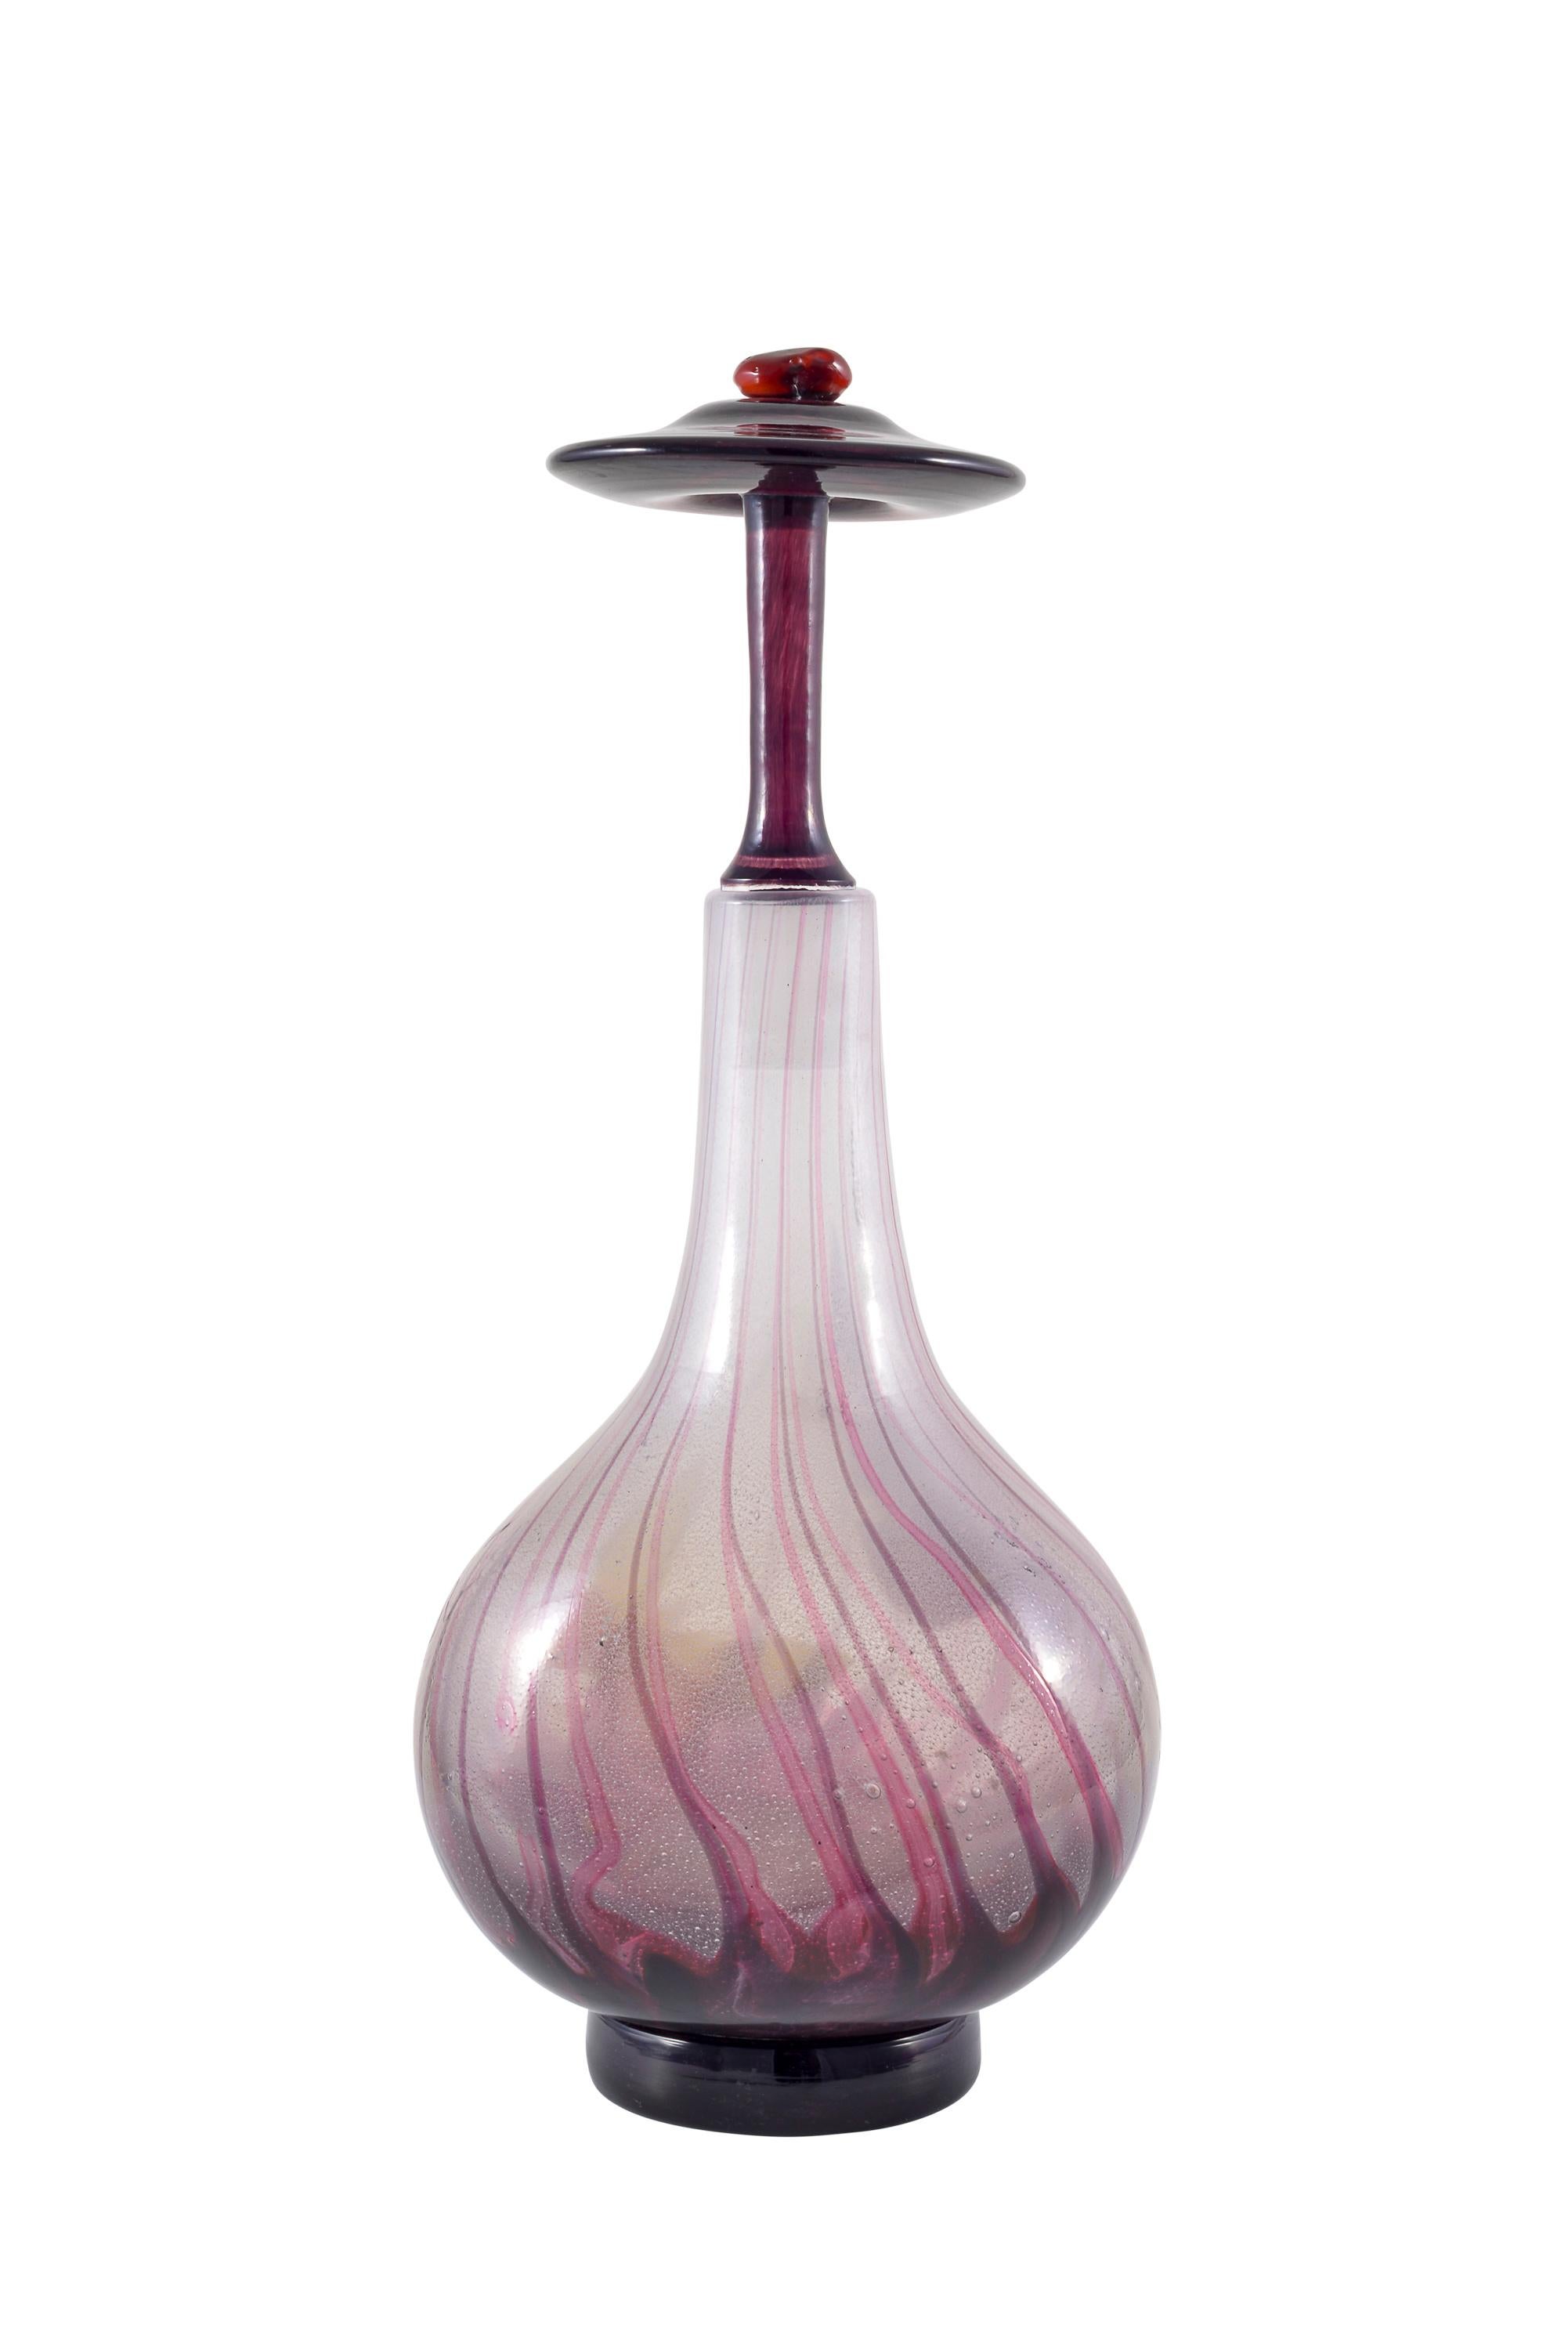 French Art Nouveau glass bottle with stopper Émile Gallé Nancy circa 1900 purple yellow butterfly Applications Marqueterie-sur-verre

Two butterflies dance around the bulbous vessel. Tendrils and foliage of pink and purple colored glass rise from